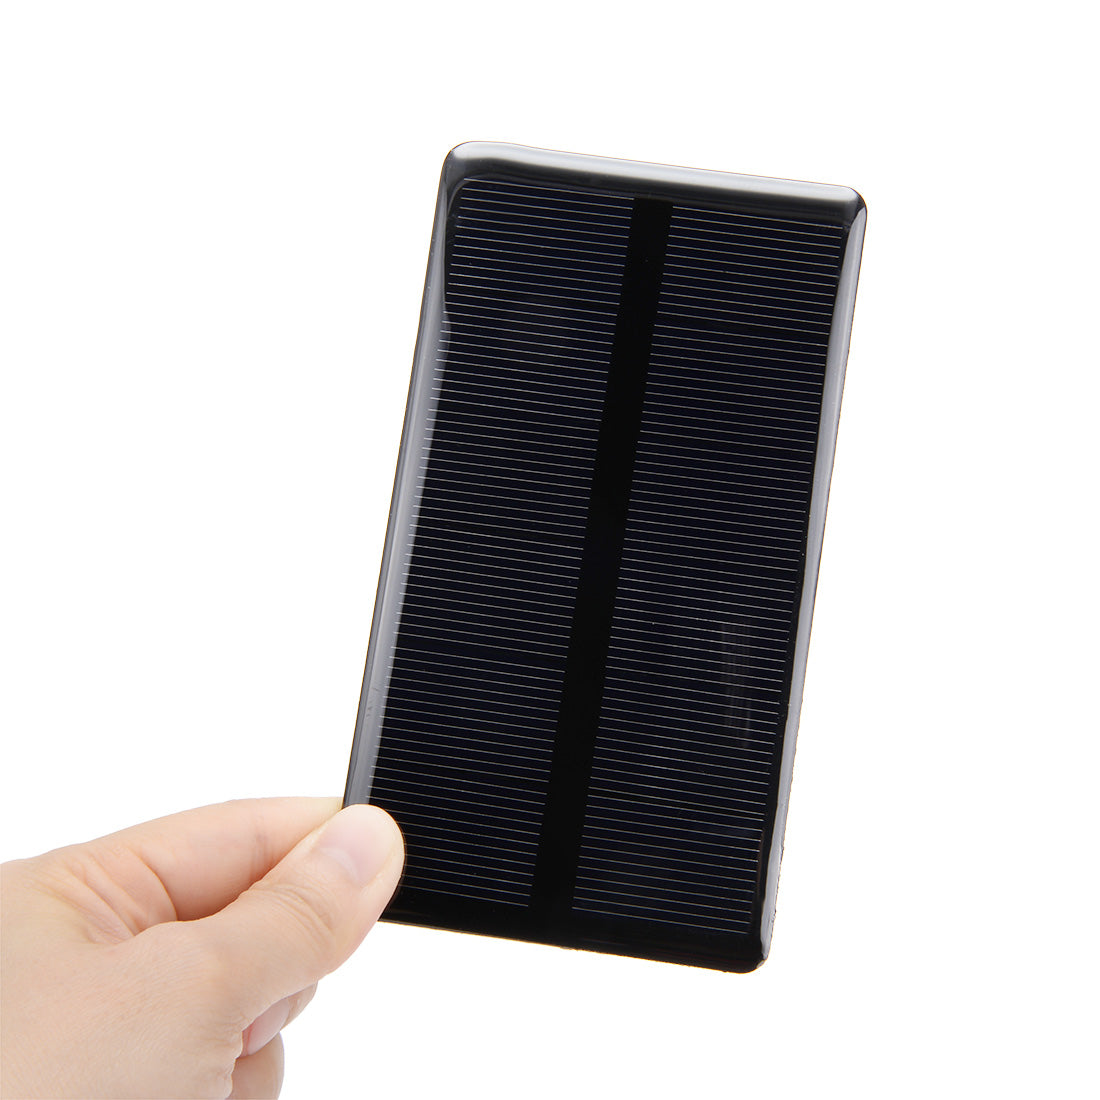 uxcell Uxcell 5Pcs 6V 180mA Poly Mini Solar Cell Panel Module DIY for Light Toys Charger 133mm x 73mm